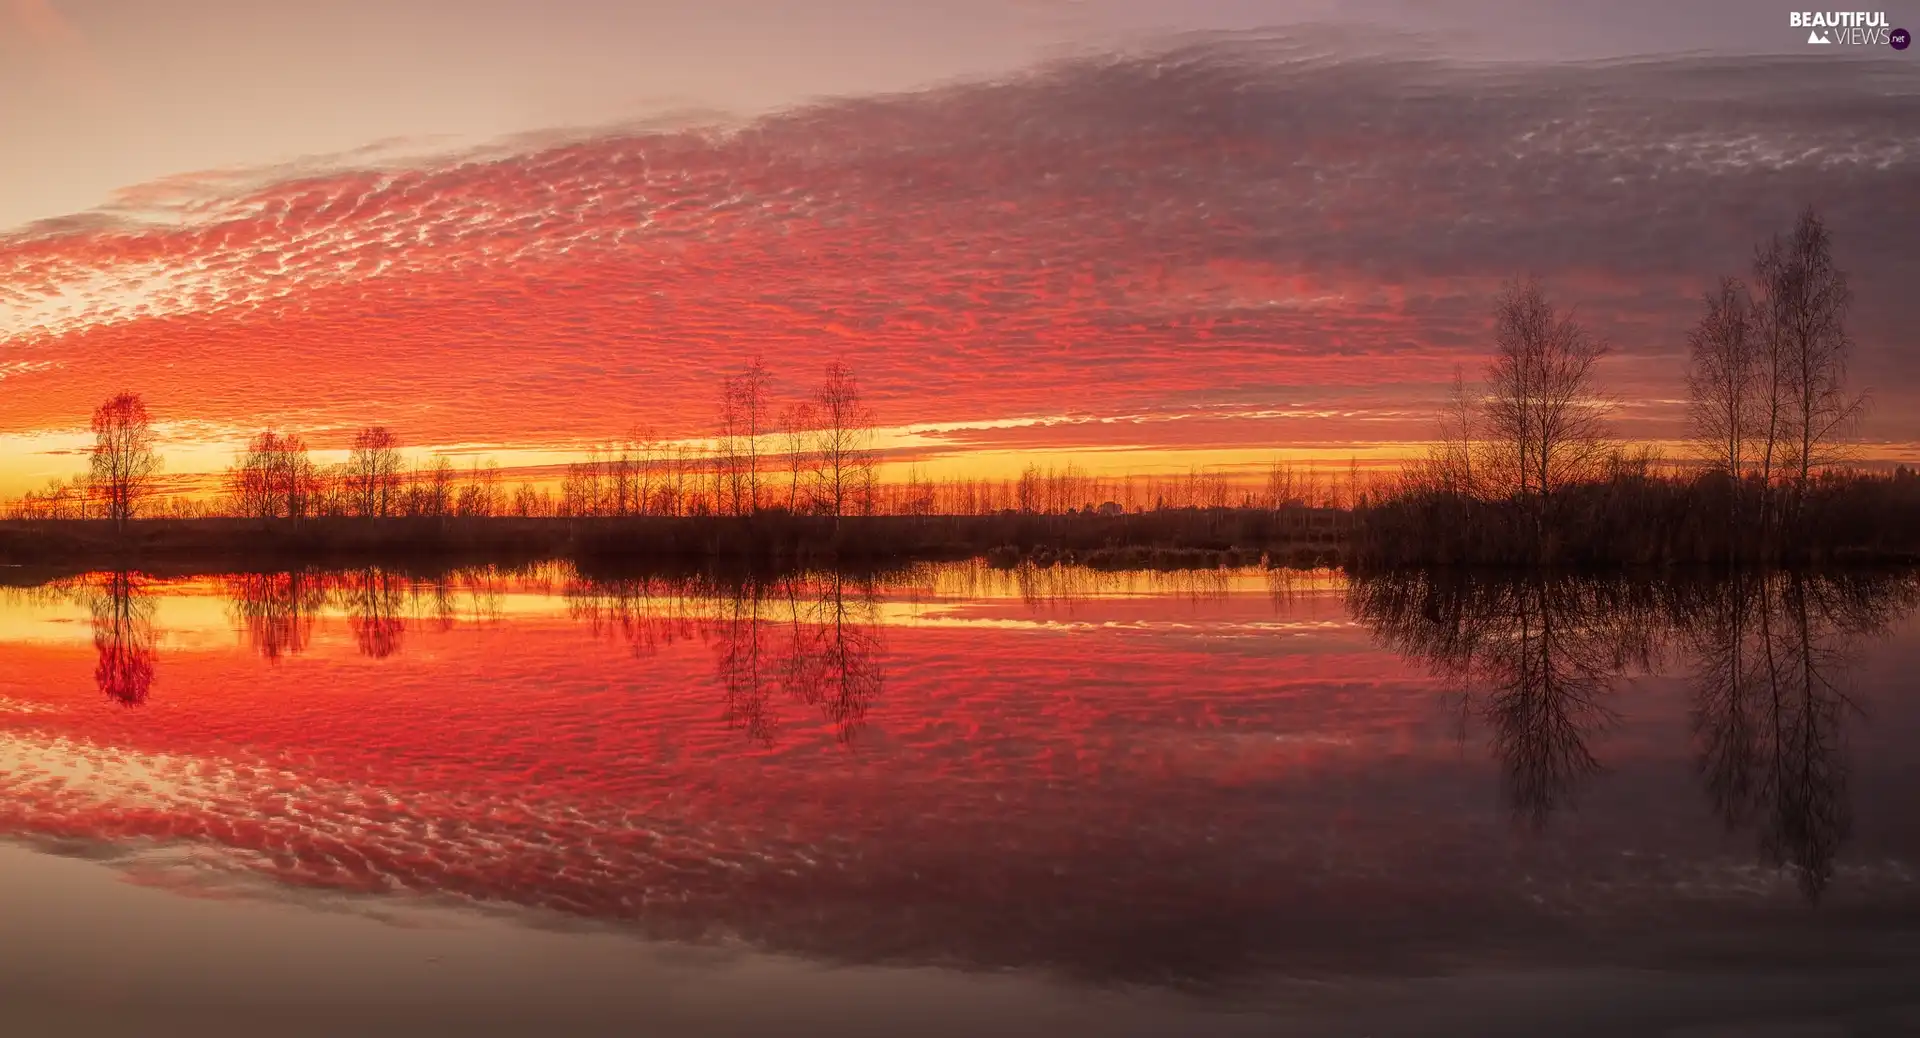 Sky, clouds, reflection, River, viewes, color, Great Sunsets, trees